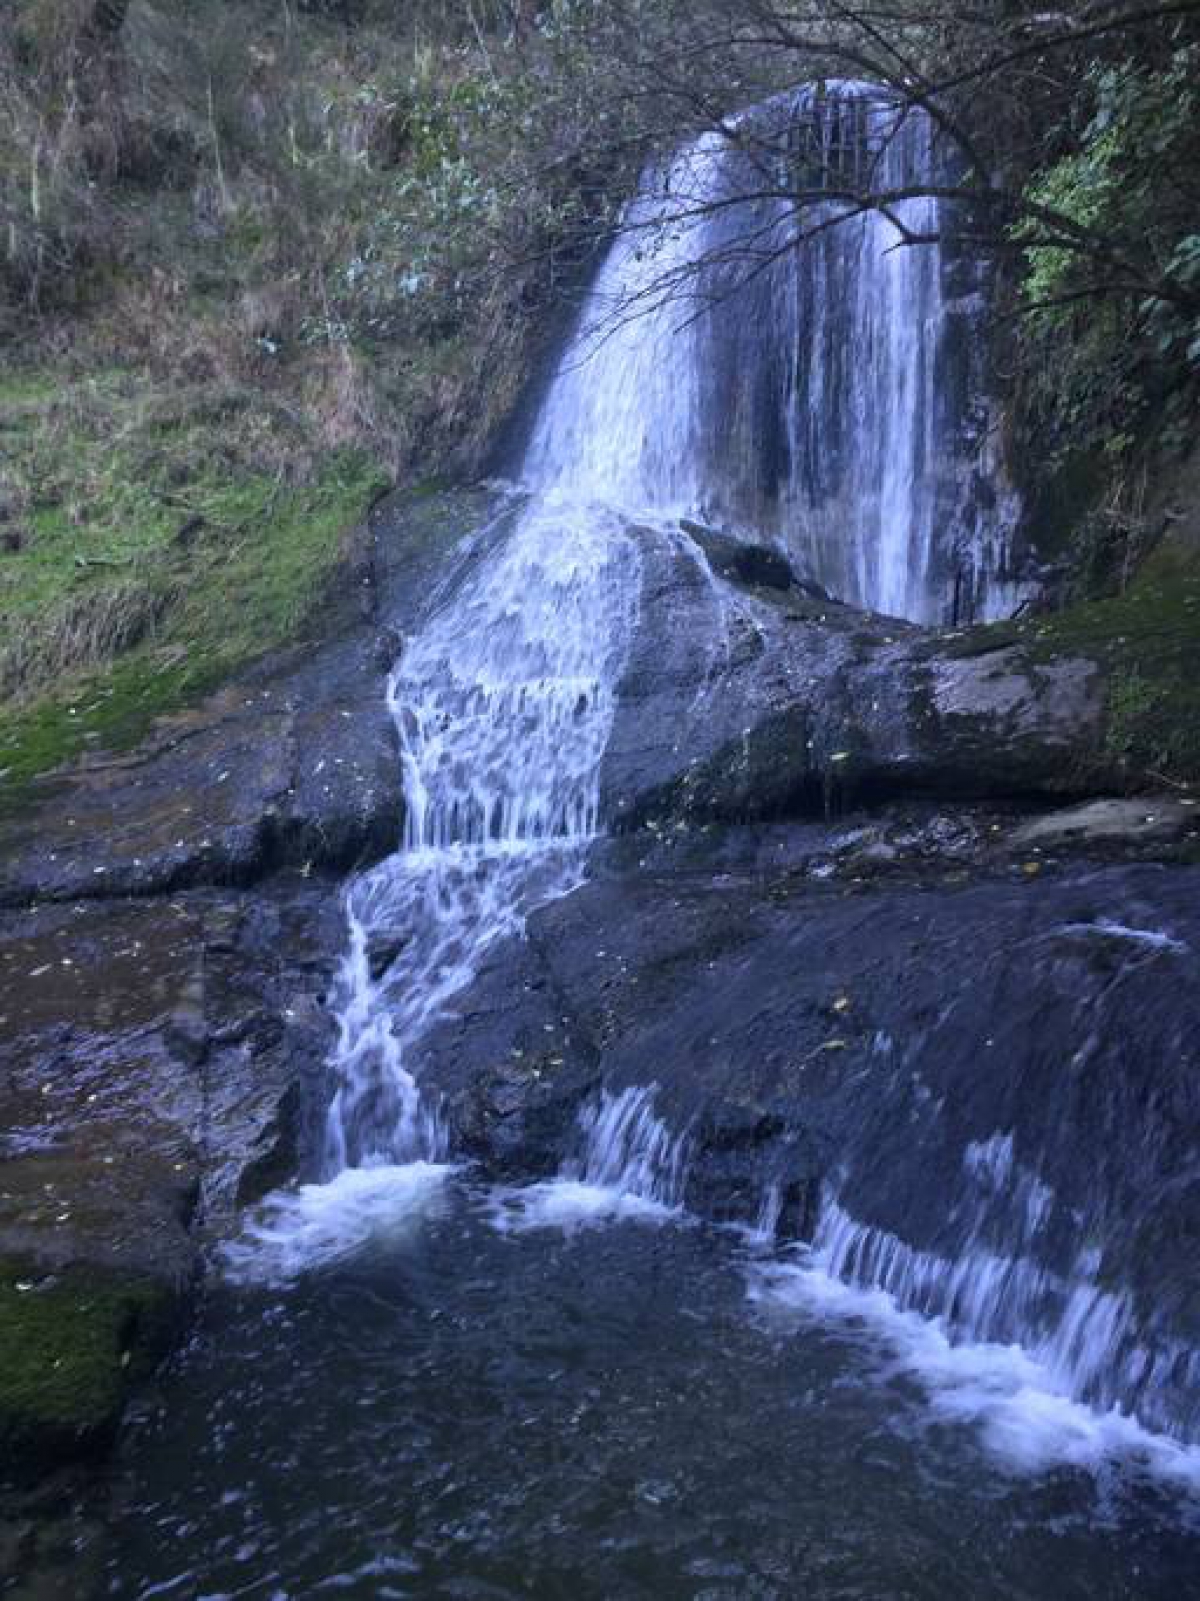 Photo of property: A waterfall on the farm